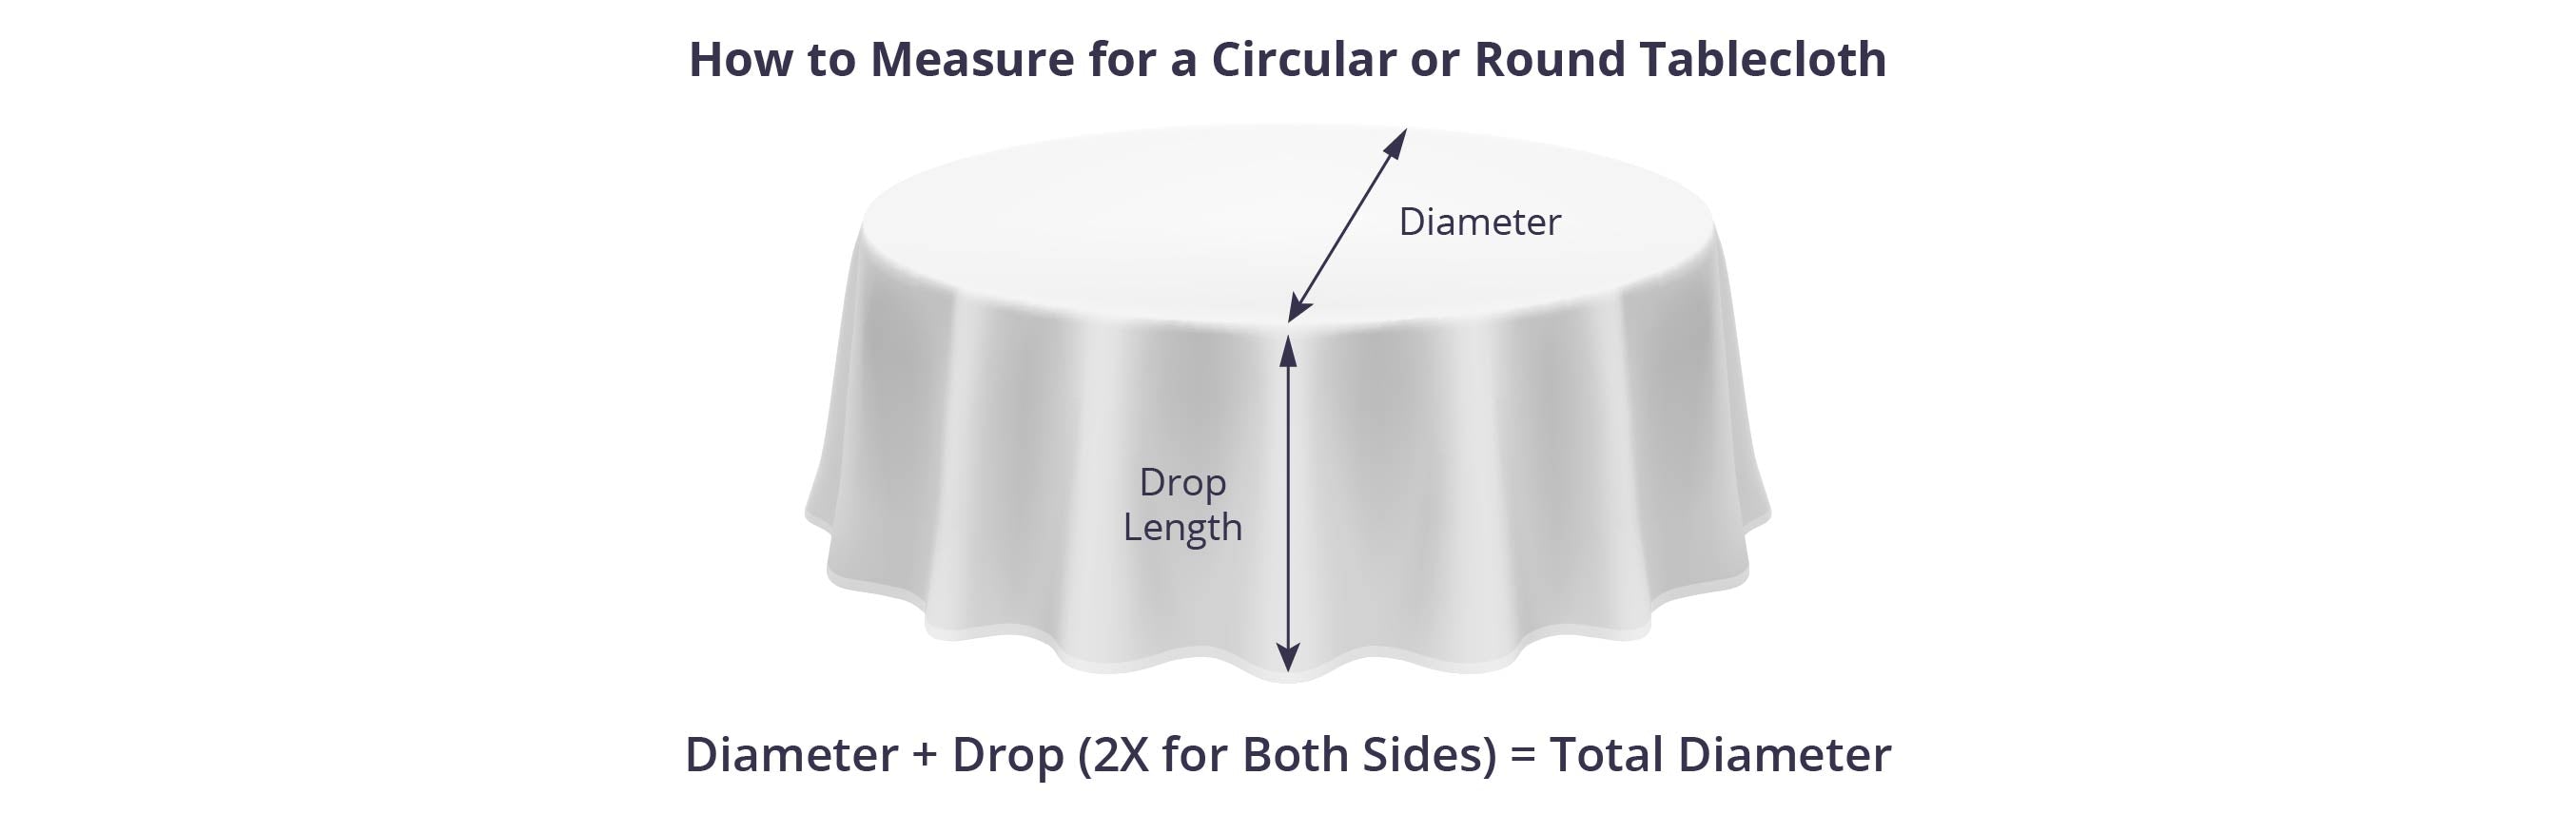 How to Measure for Circular or Round Tablecloth